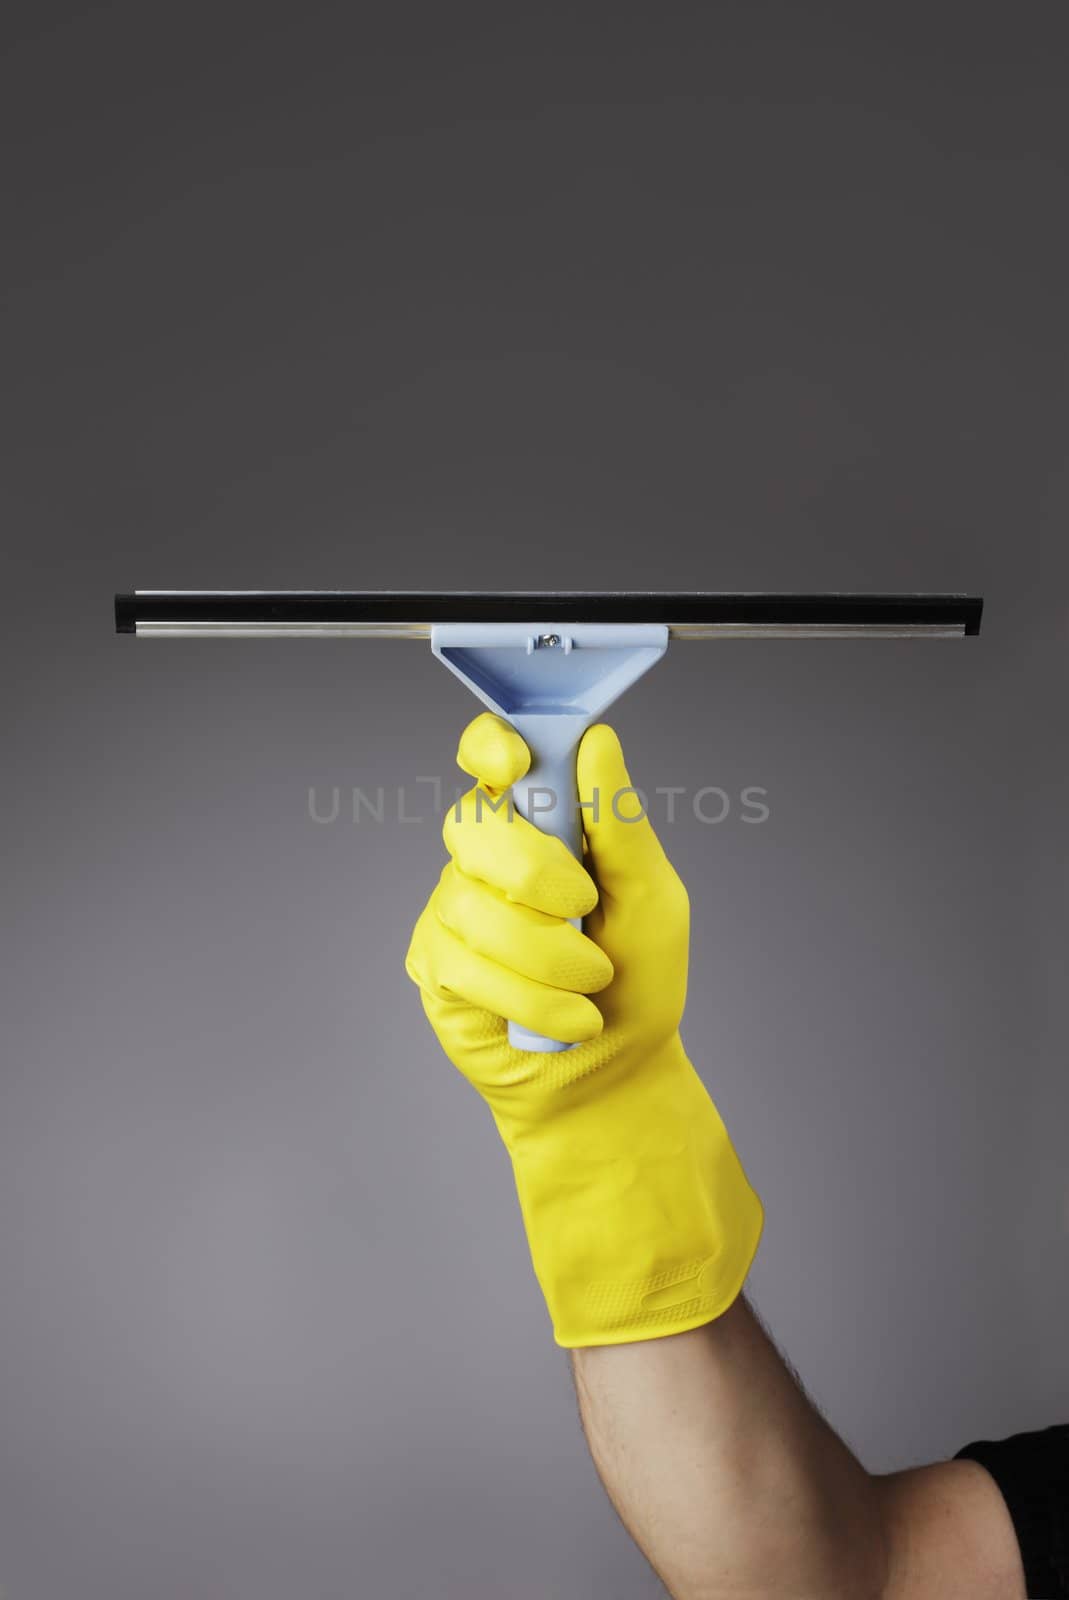 Squeegee by Stocksnapper